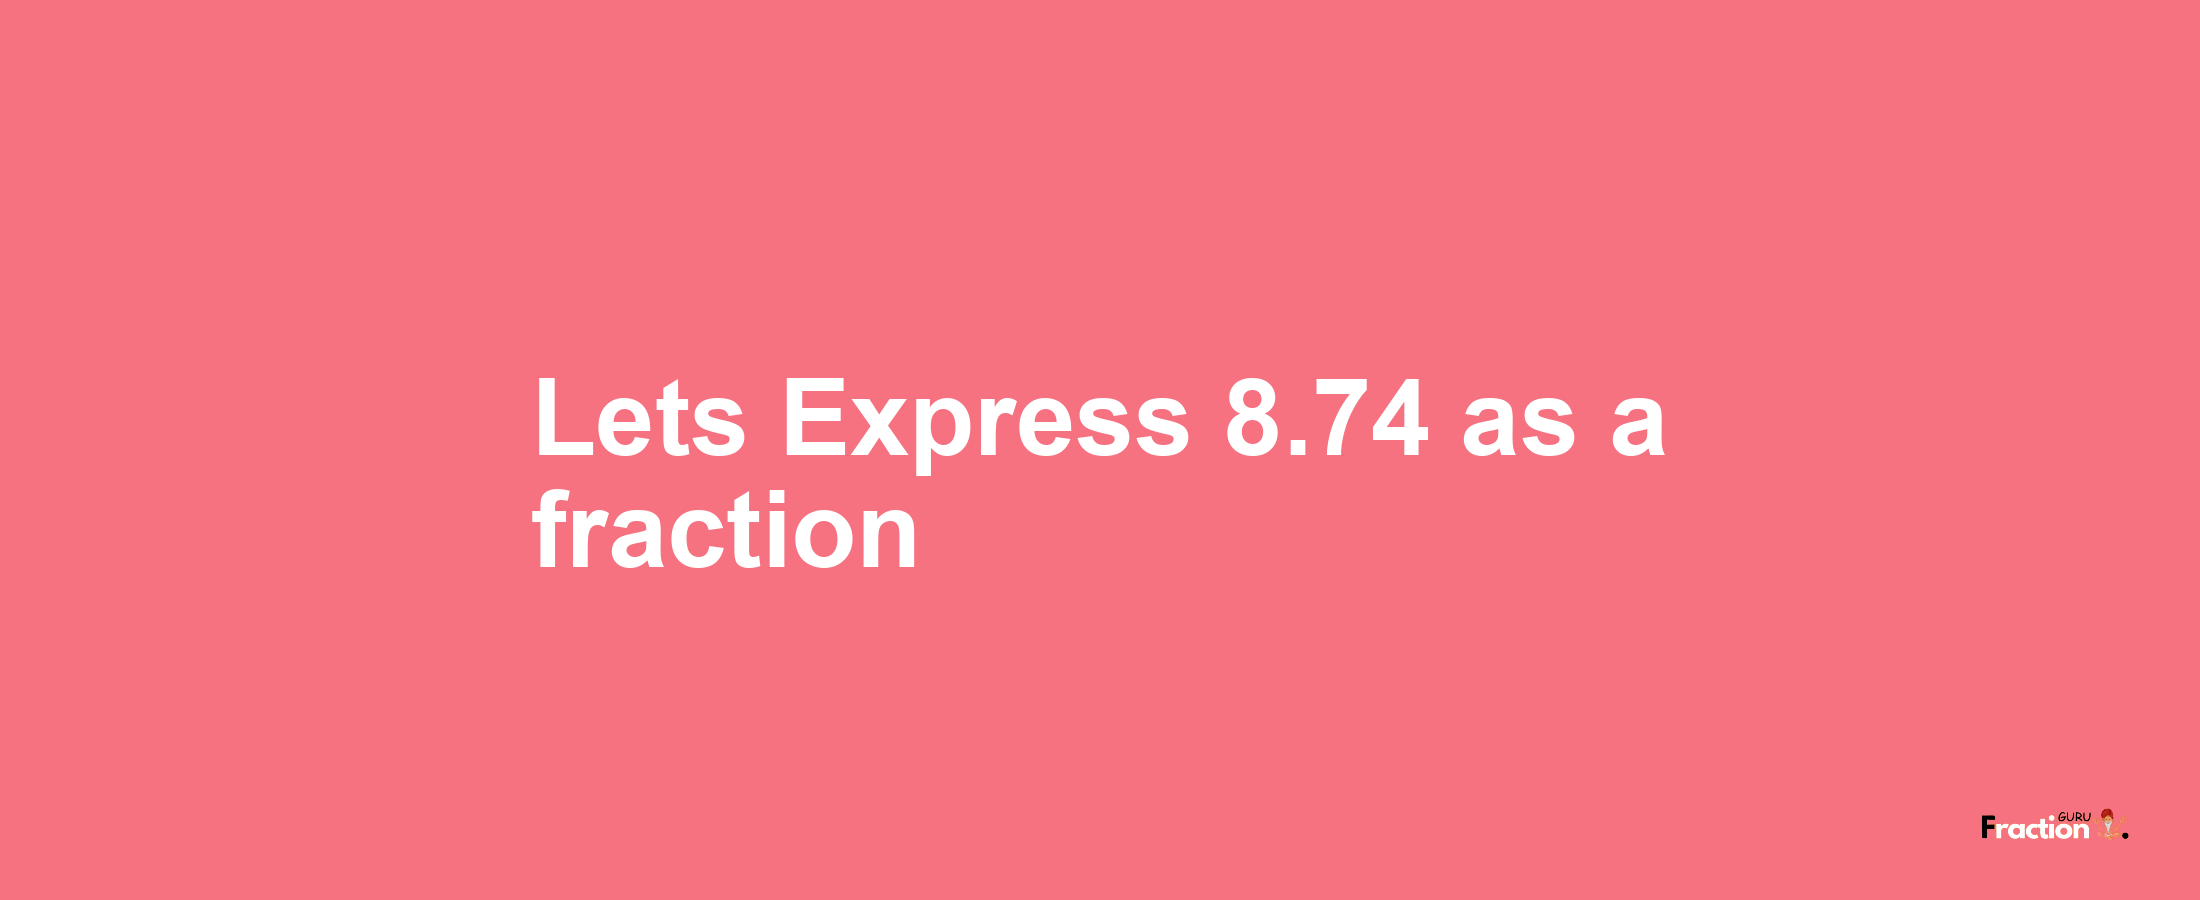 Lets Express 8.74 as afraction